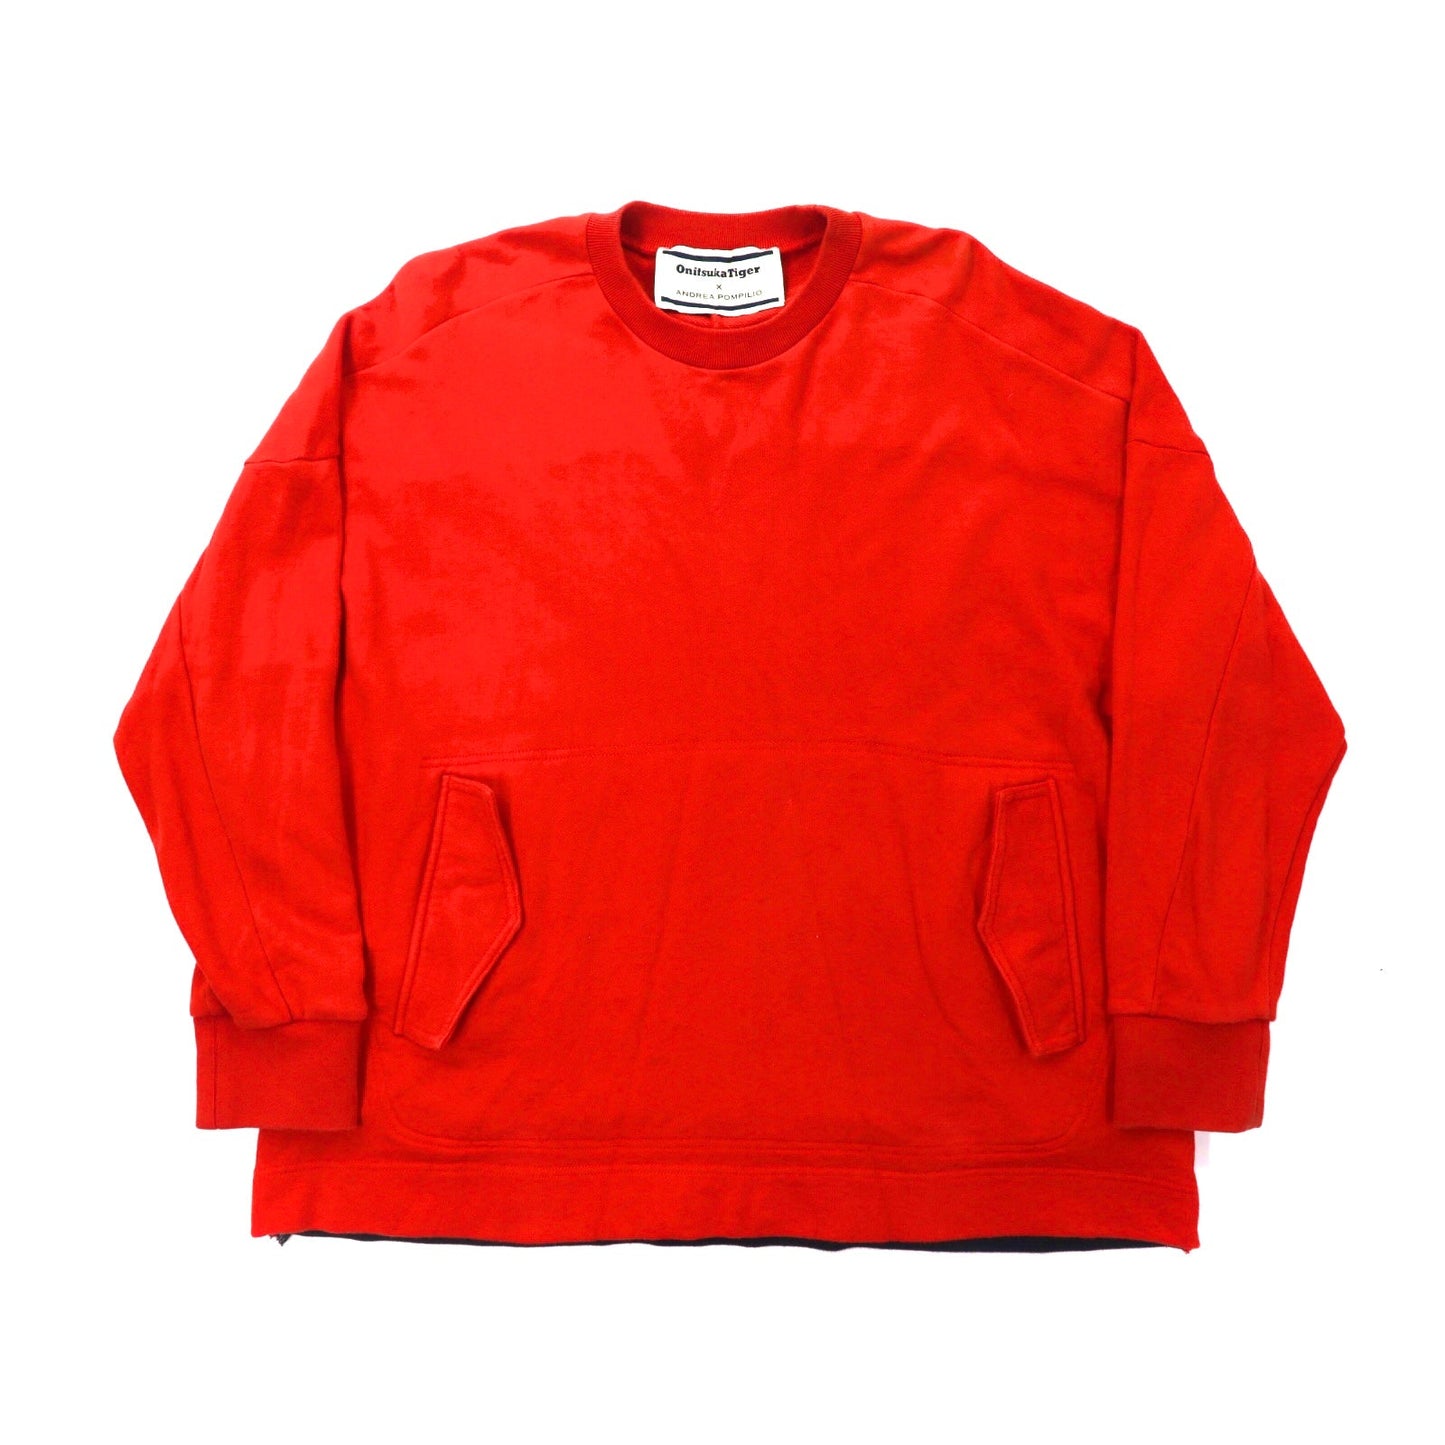 Onitsuka Tiger x Andrea Pompilio Sweatshirt M Red Cotton – 日本然